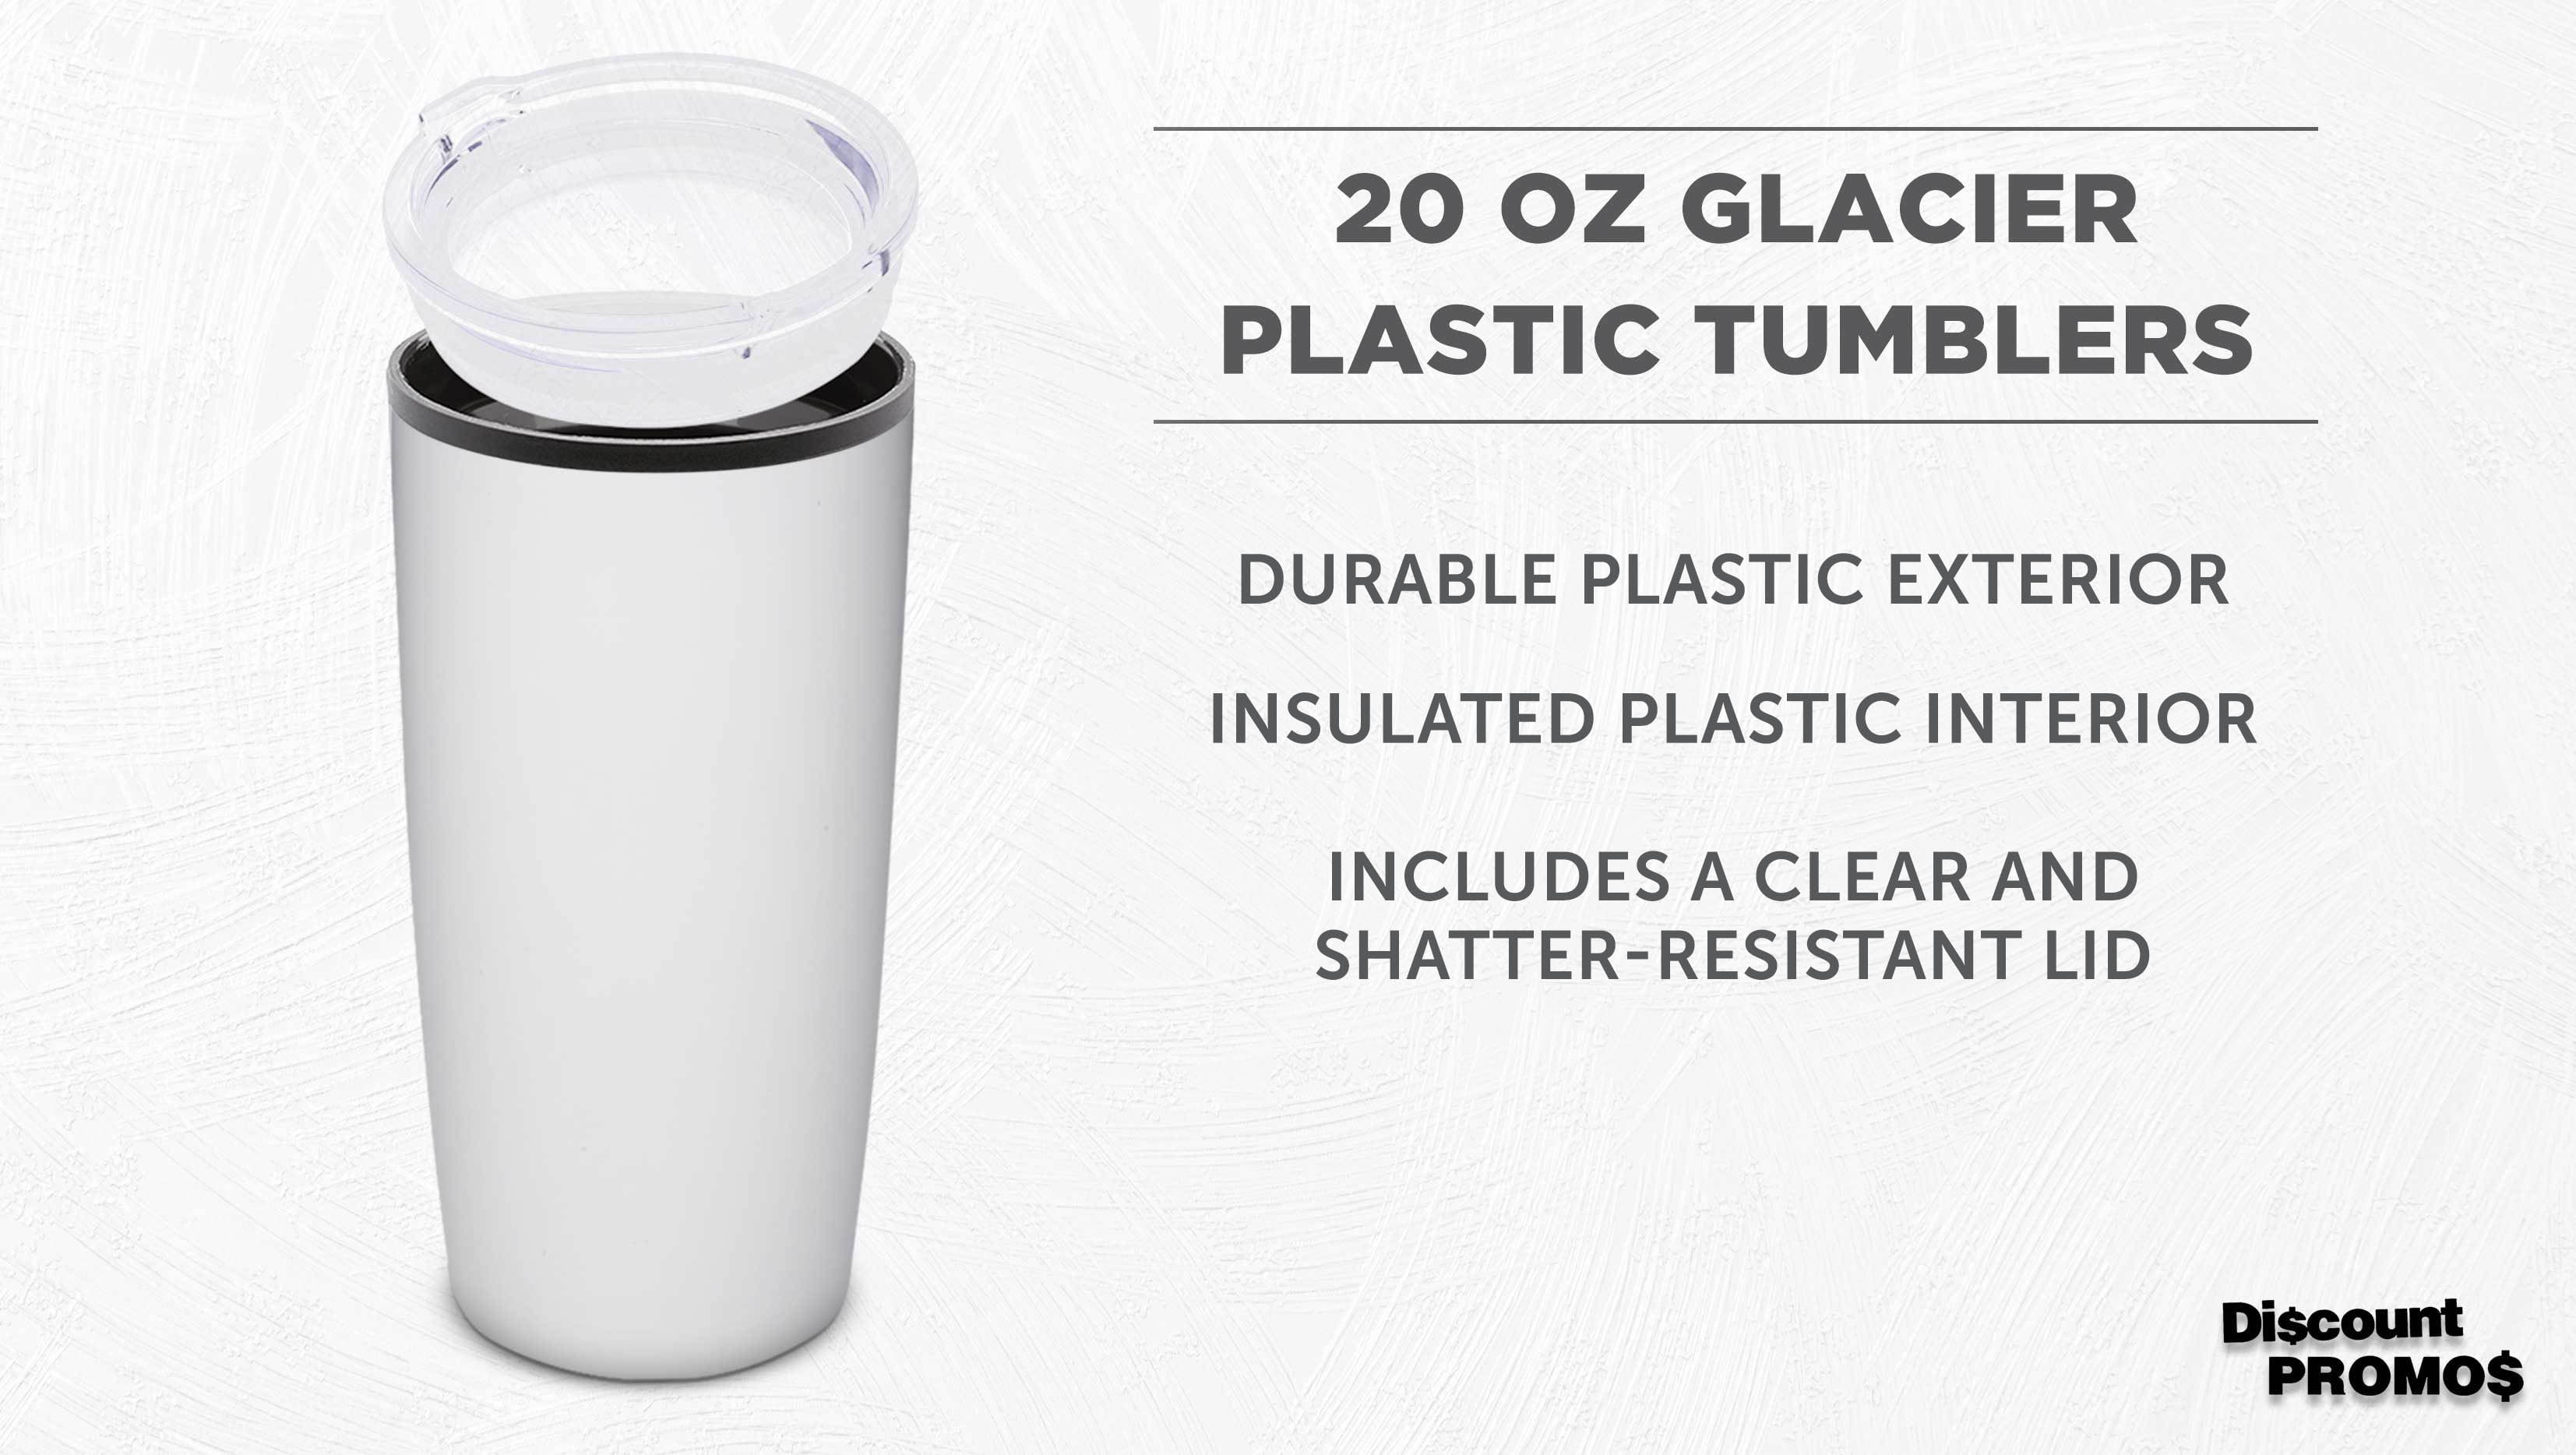 VEGOND Stainless Steel Tumblers Bulk 6 Pack, 20 oz Vacuum Insulated Skinny  Tumblers with Lid and Str…See more VEGOND Stainless Steel Tumblers Bulk 6